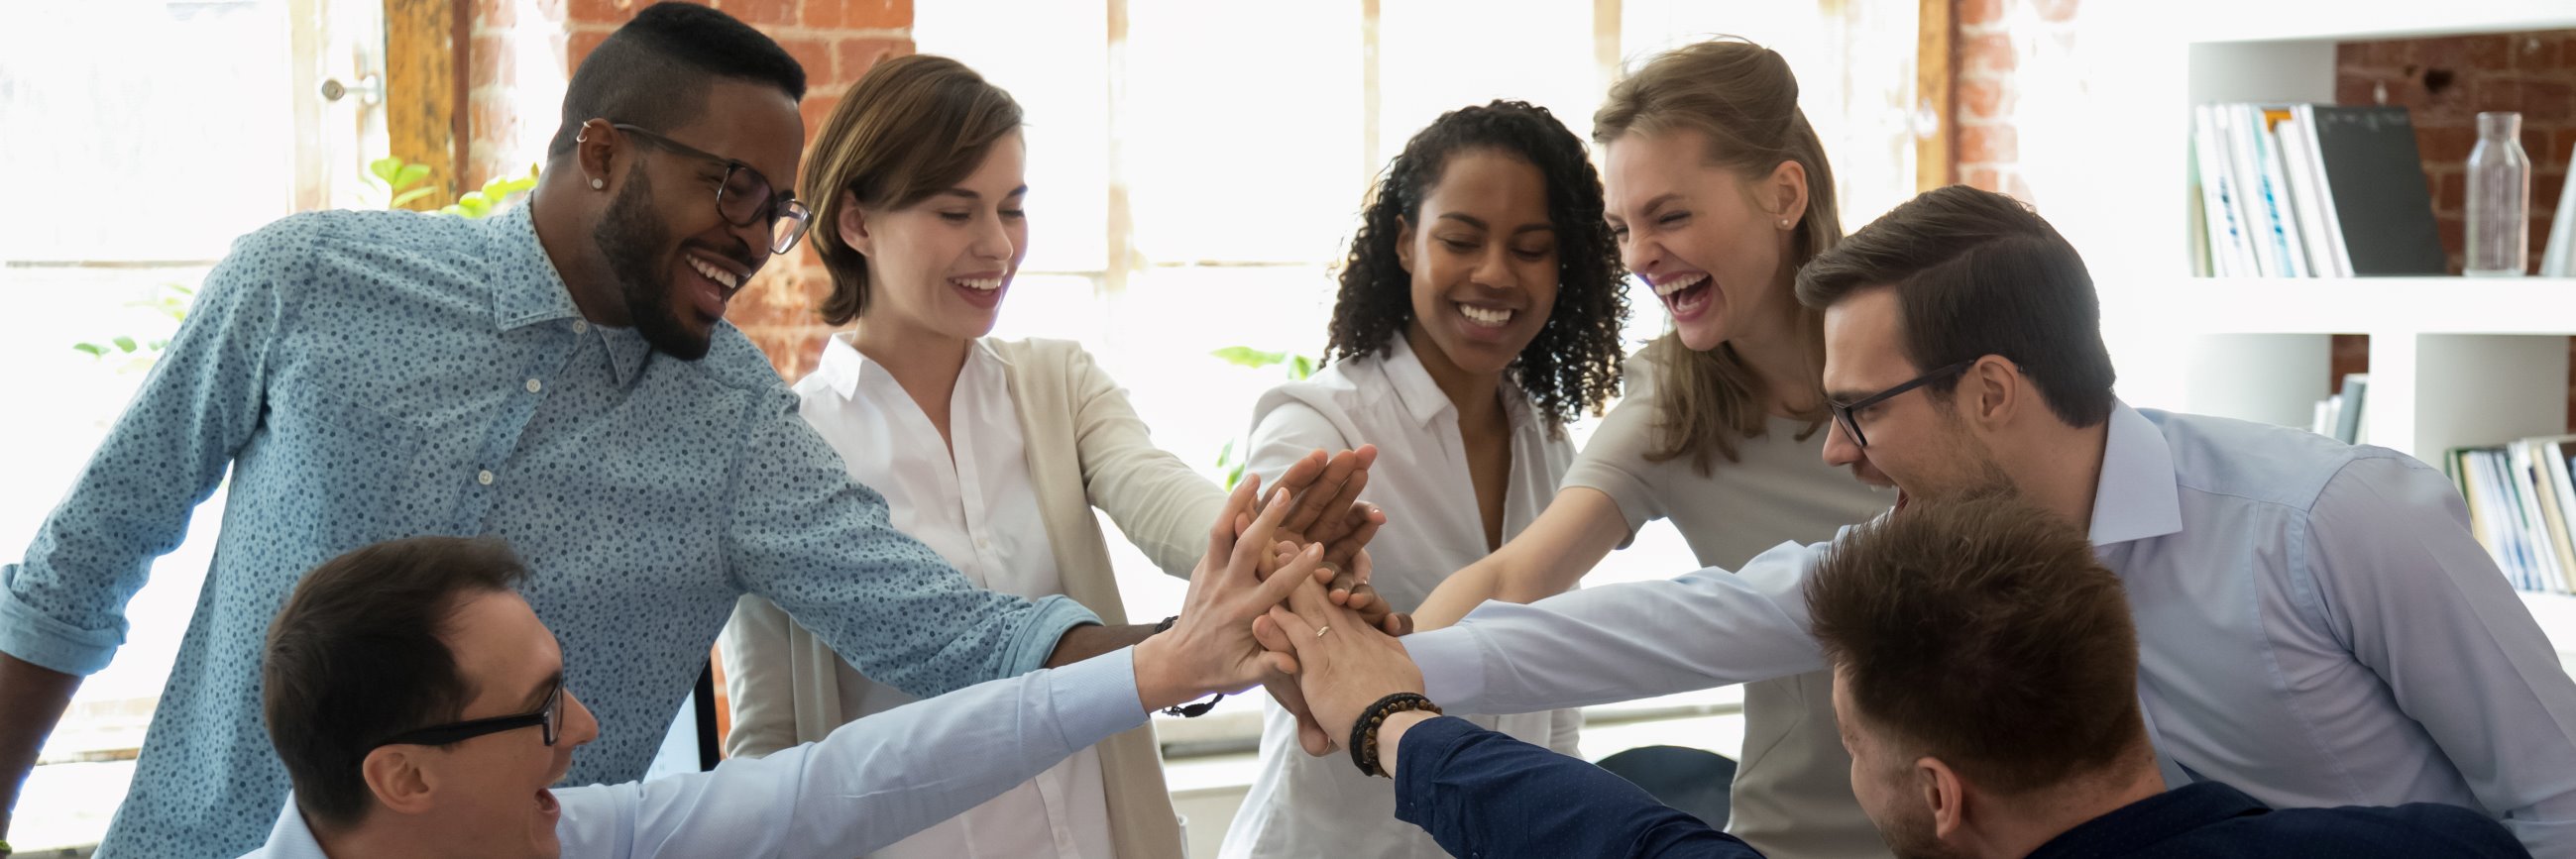 stock-photo-happy-multi-ethnic-colleagues-celebrating-success-giving-high-five-show-support-share